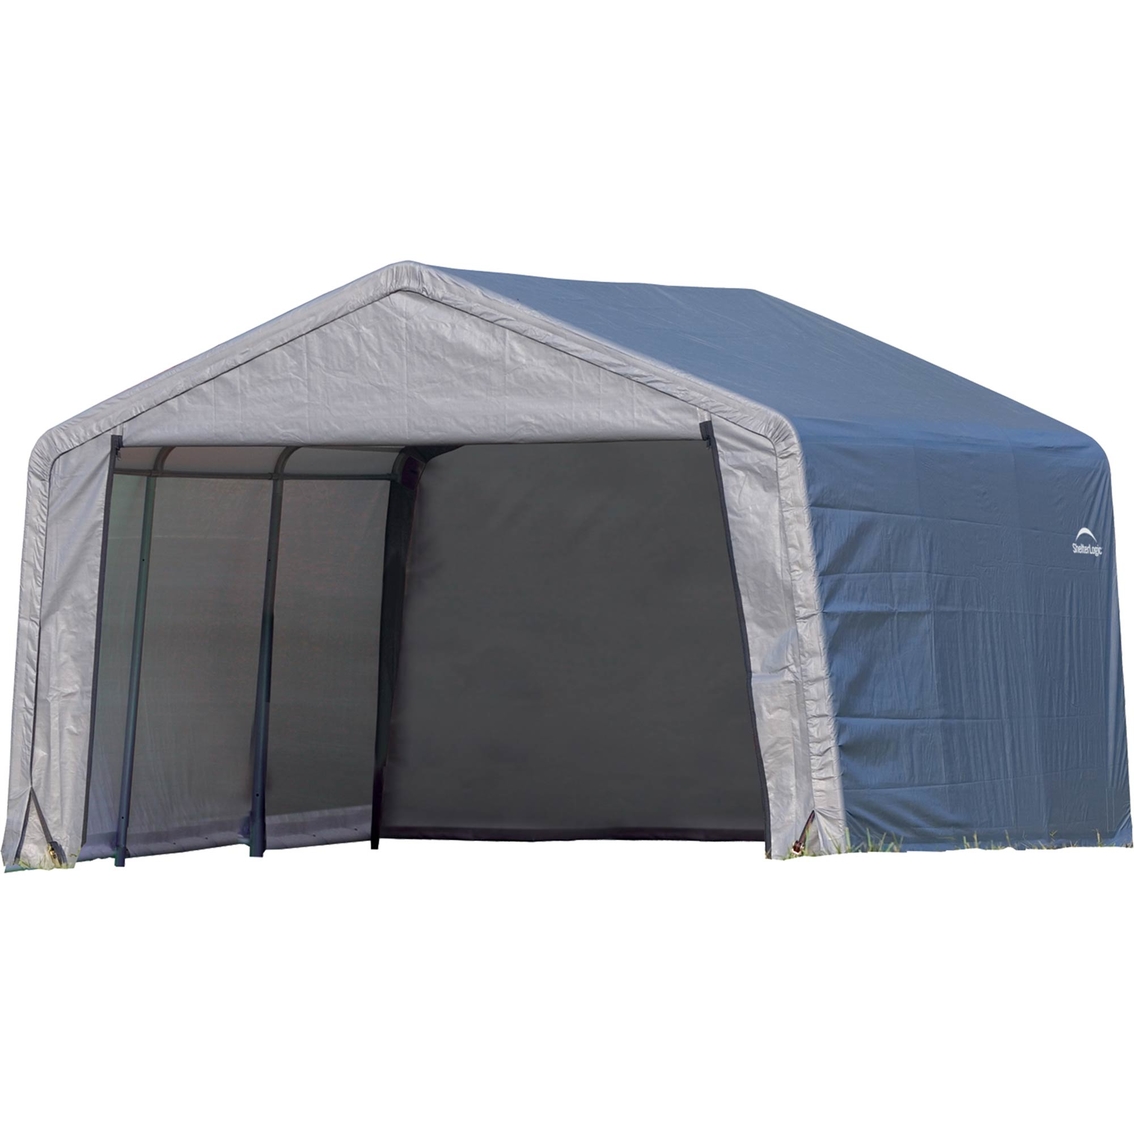 ShelterLogic 12 x 12 x 8 ft. Shed-in-a-Box - Image 1 of 3